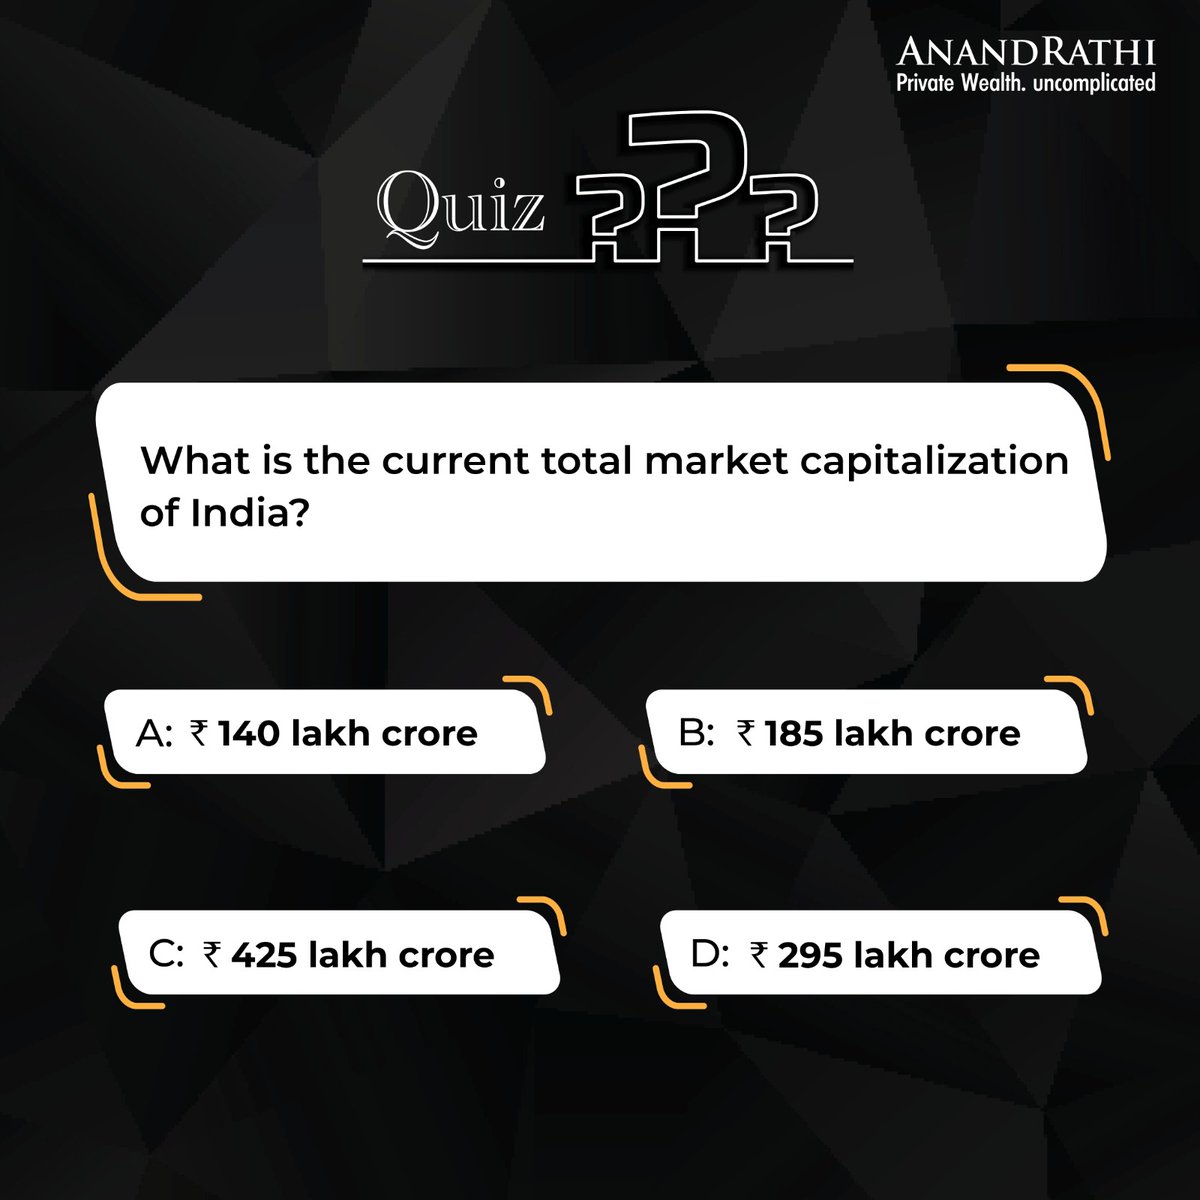 #TuesdayQuiz

Comment your answers below.

(𝐀𝐧𝐬𝐰𝐞𝐫 𝐟𝐨𝐫 𝐭𝐡𝐞 𝐪𝐮𝐢𝐳 𝐰𝐢𝐥𝐥 𝐛𝐞 𝐬𝐡𝐚𝐫𝐞𝐝 𝐭𝐨𝐦𝐨𝐫𝐫𝐨𝐰)

Know more: anandrathiwealth.in/landing

#mathematicalrevolution #financialplanning #wealthmanagement #mutualfunds #anandrathiwealth #investment #investor…